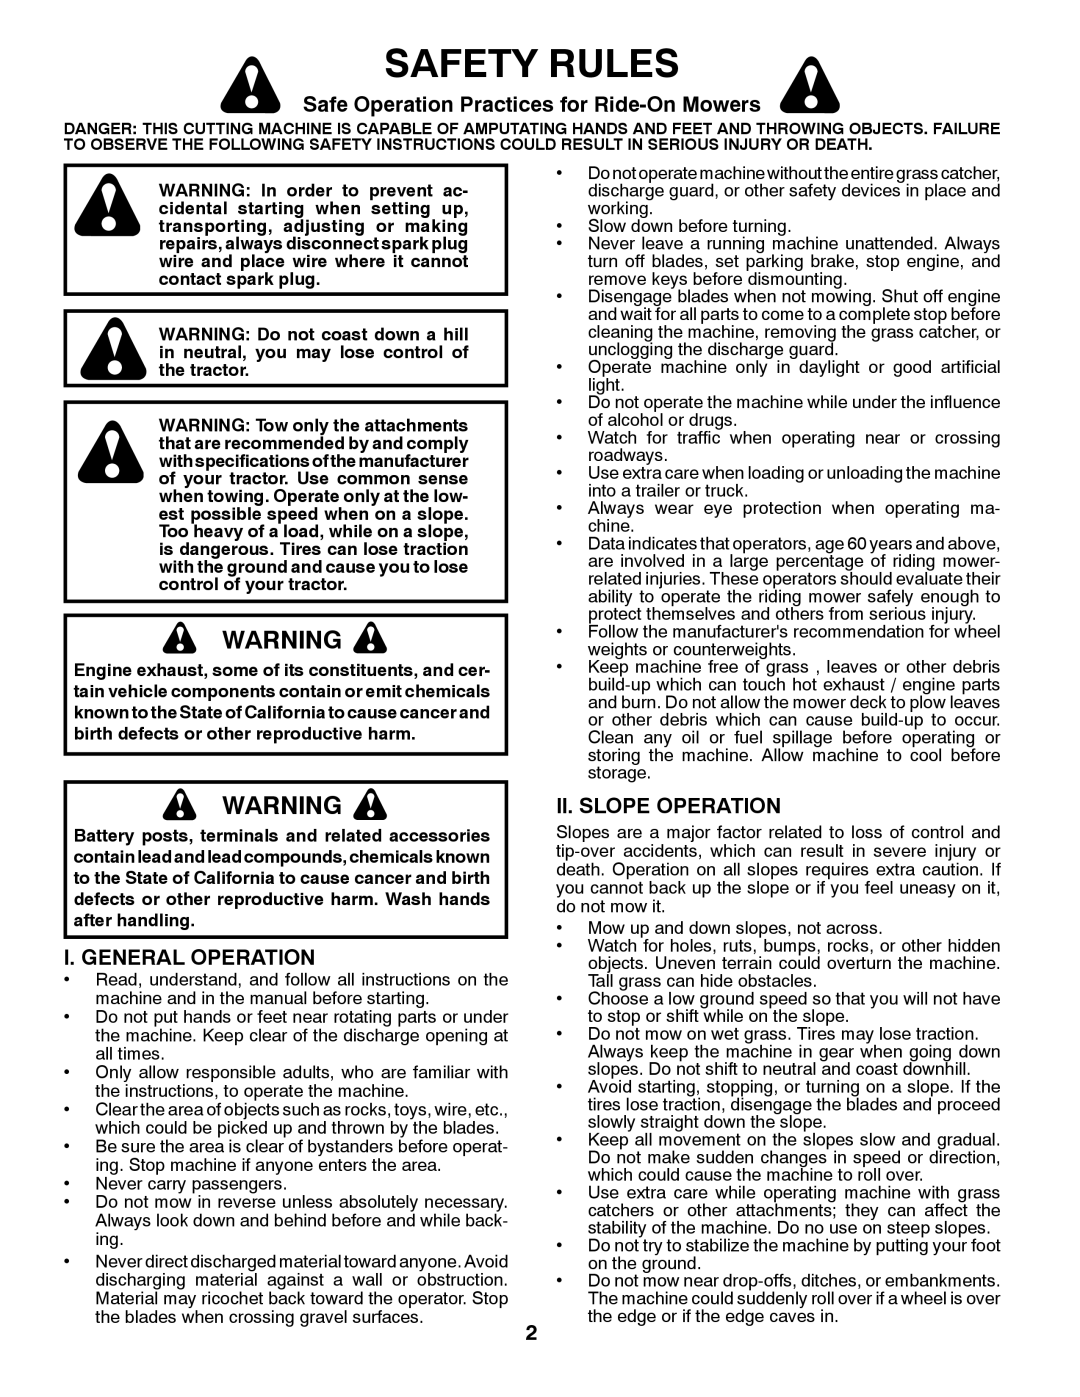 Husqvarna 96045000412 Safety Rules, Safe Operation Practices for Ride-On Mowers, I. General Operation, Ii. Slope Operation 